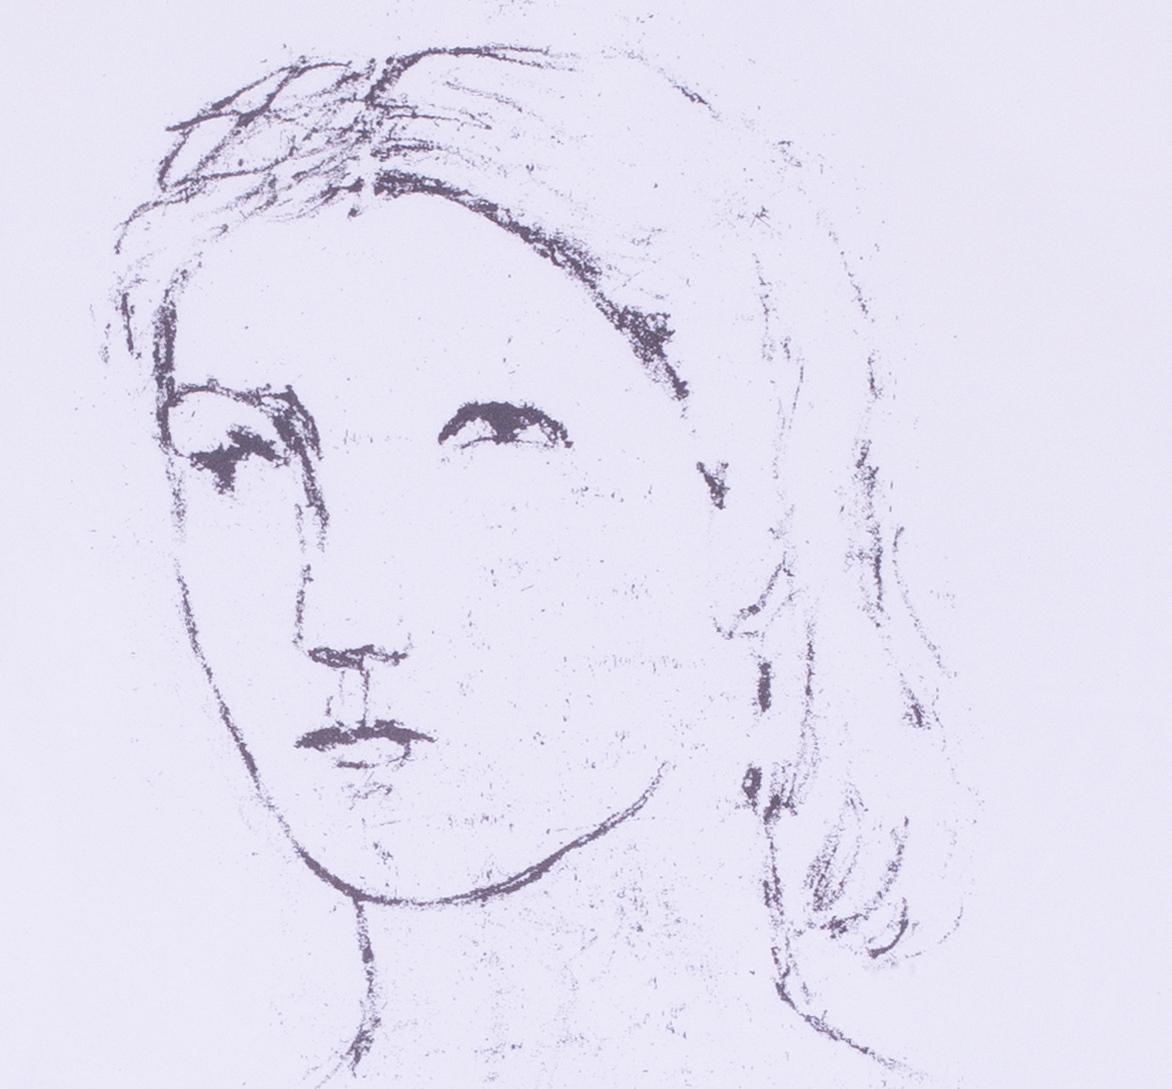 Henry Moore (British, 1898-1986)
Head of a girl
Softground etching 
signed in pencil `Moore’ (lower right)
Conceived in 1983 by the Printmaking Department Trust Fund Appeal, The Royal College of Art, London, Henry Moore Foundation
